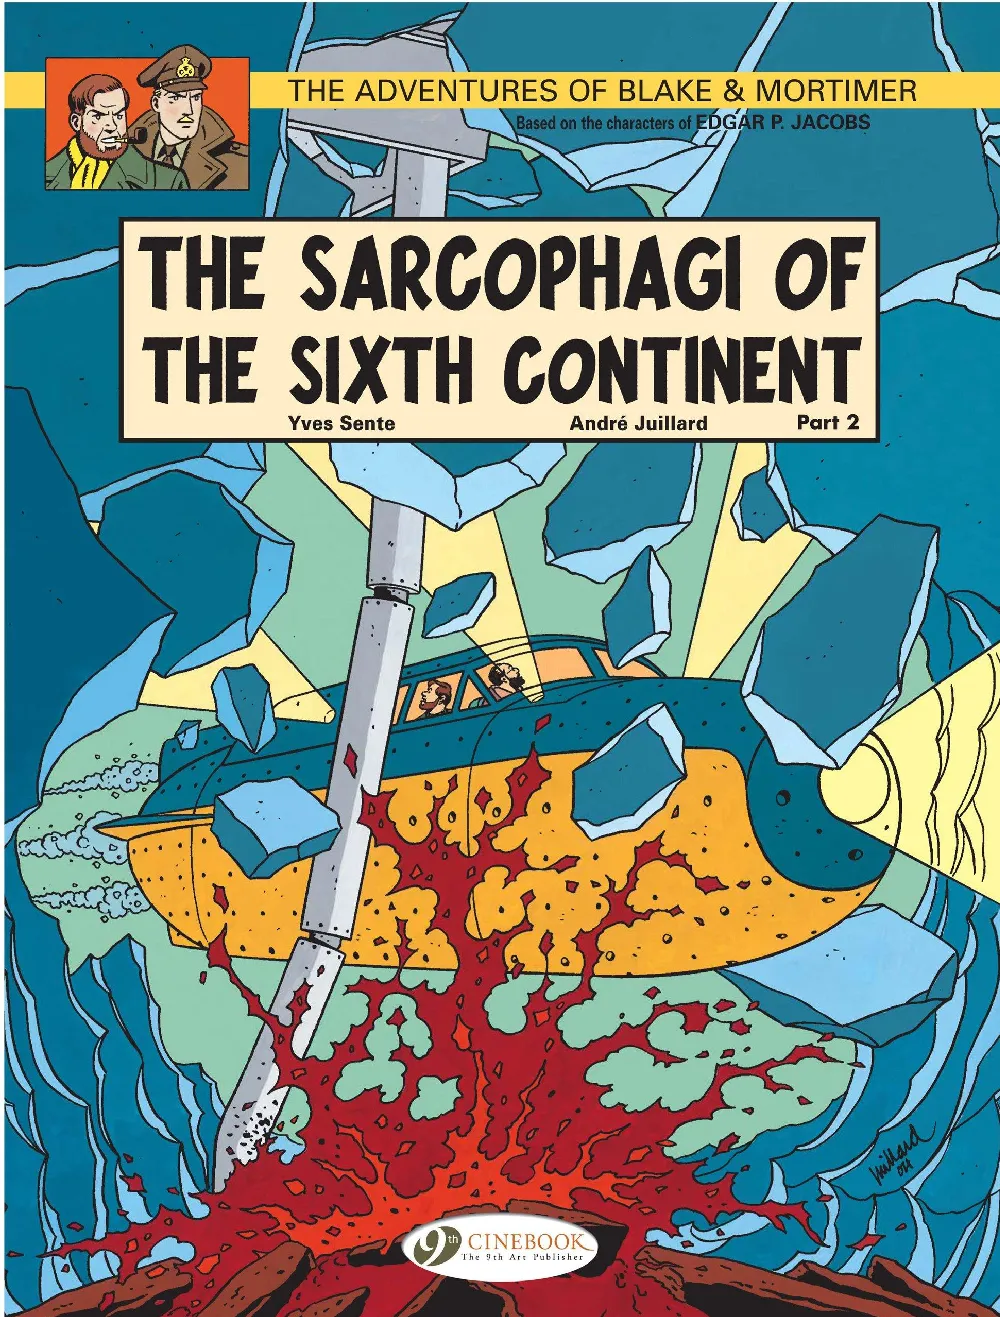 The Sarcophagi of the Sixth Continent - Part 2